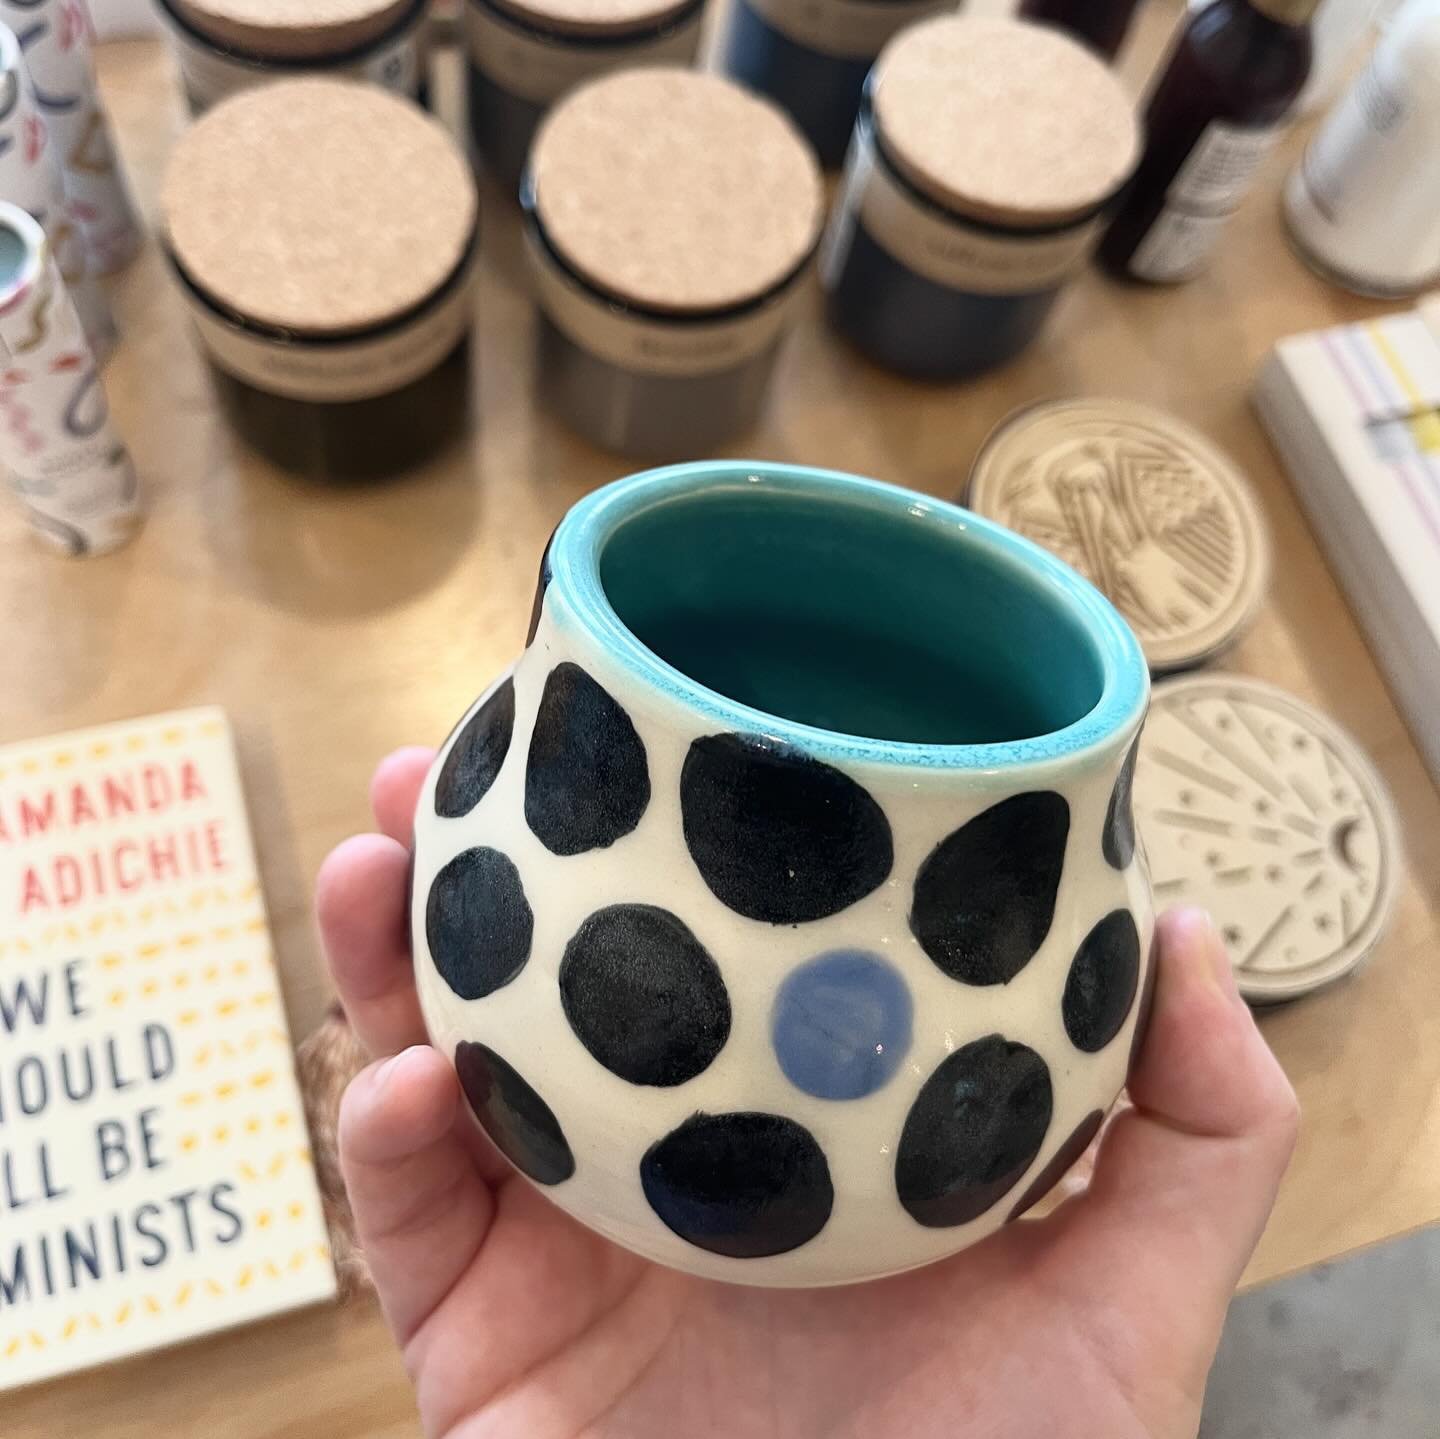 Restocked a few things at @_thegoodshop_ this weekend, where we&rsquo;re celebrating springtime 🌸 Lots of new surface designs with this latest kiln unload&mdash;bright colors, new glazes (!!) and new forms with a focus on vessels for plants. Some va